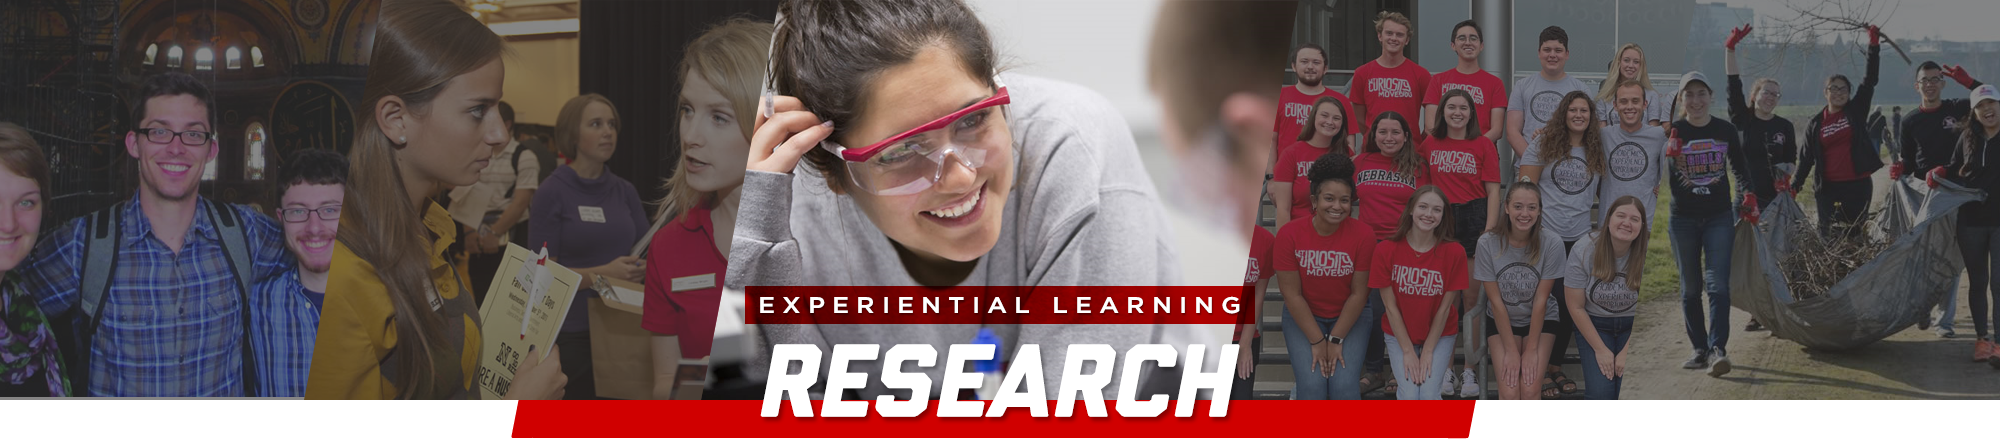 Research - Experiential Learning